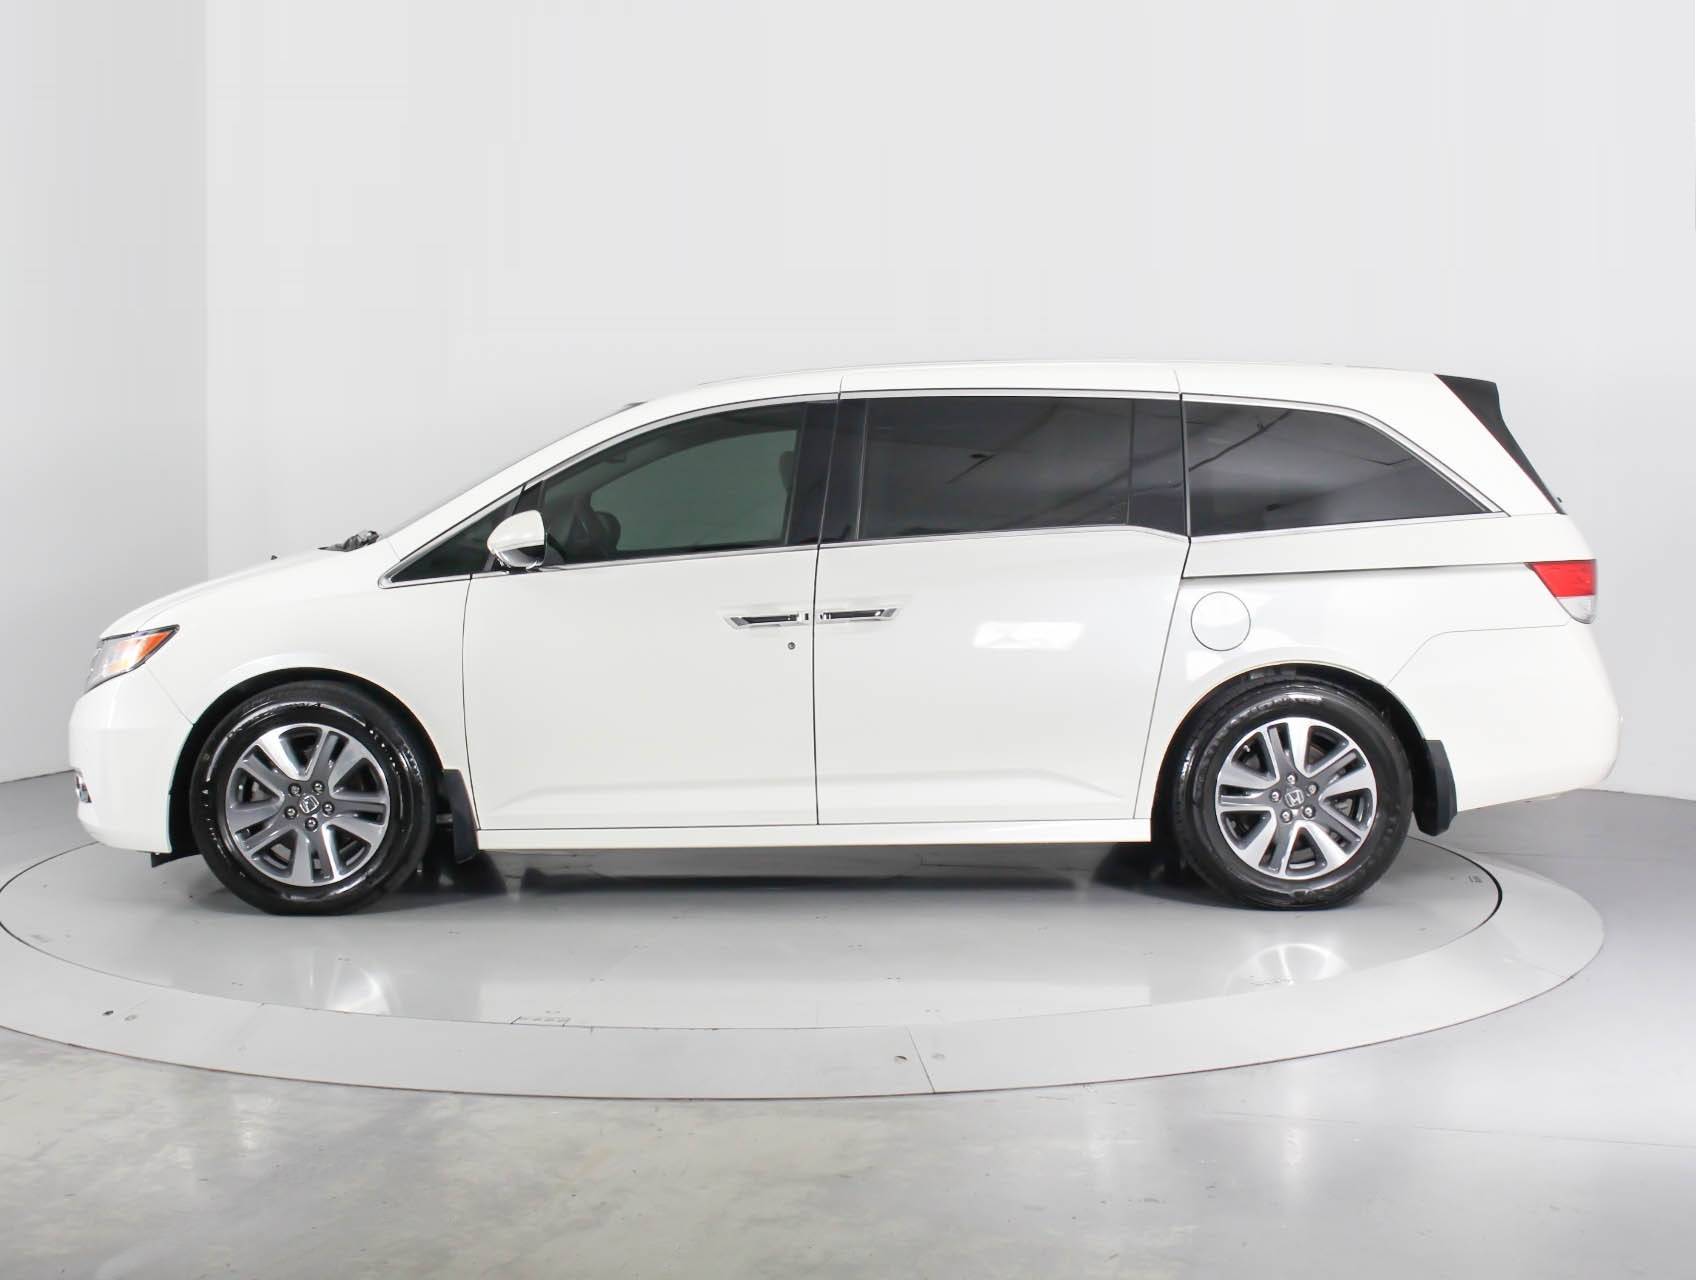 Used 2016 HONDA ODYSSEY Touring Elite for sale in WEST PALM | 97648